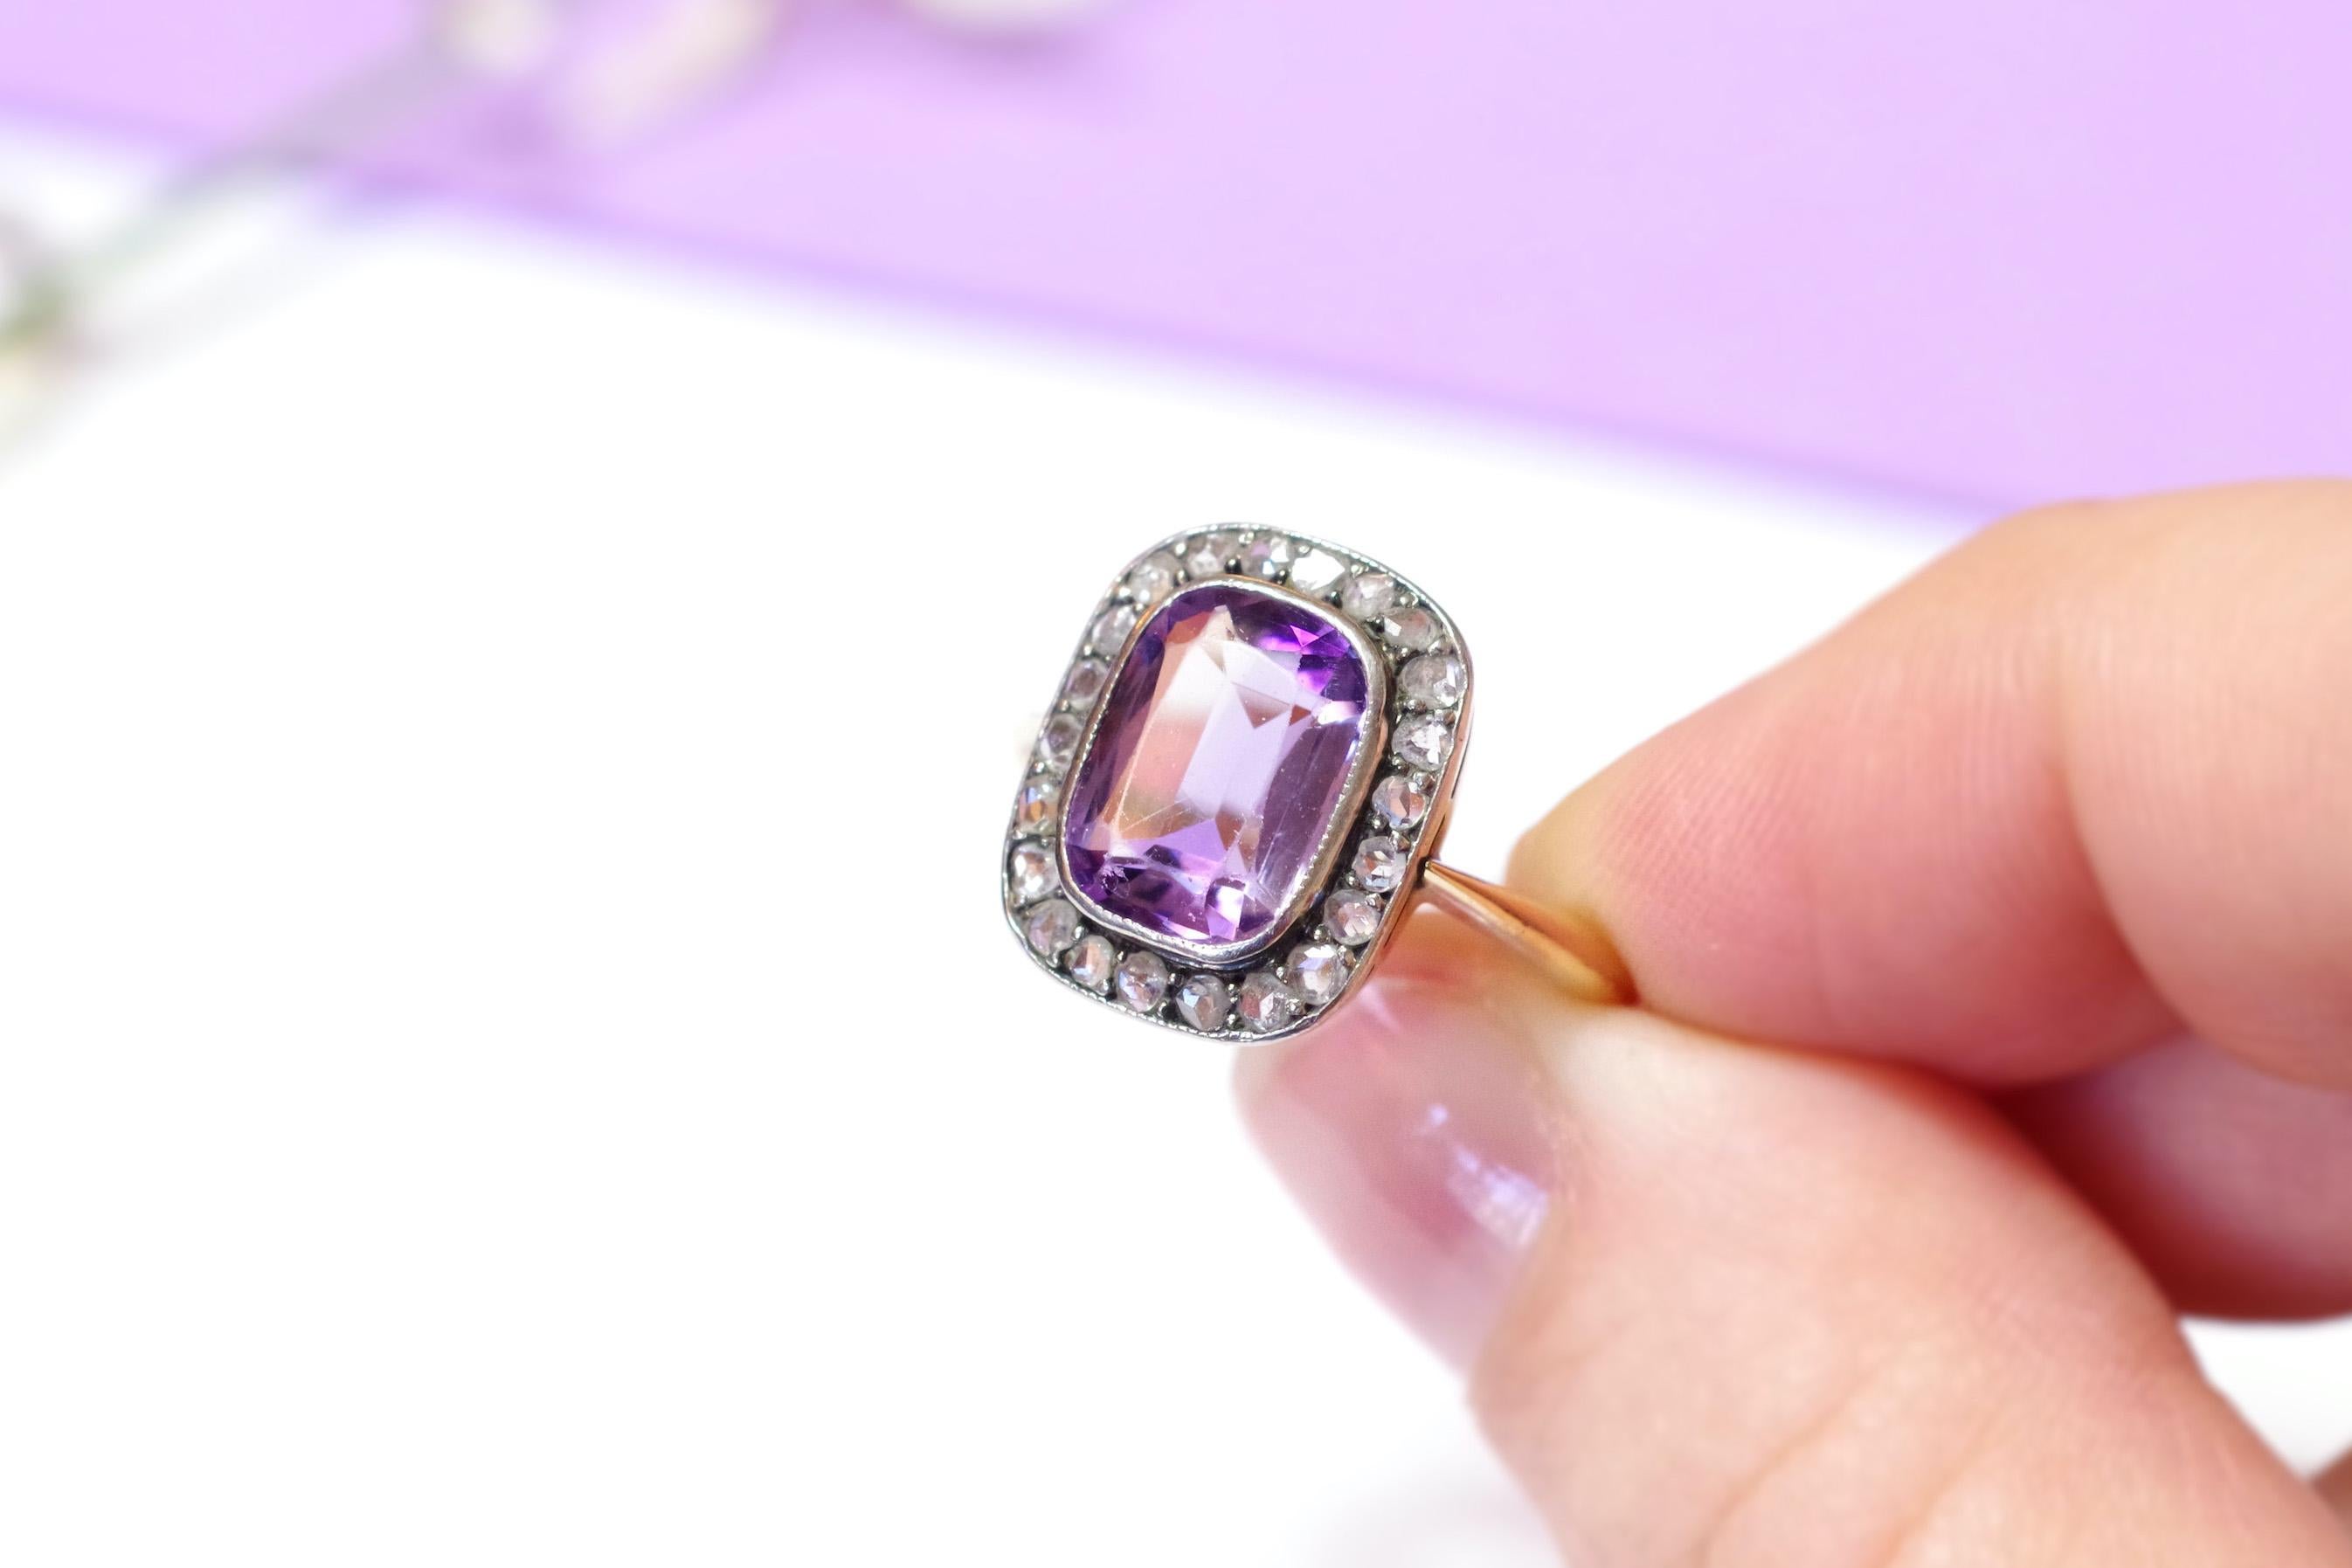 Late Victorian amethyst diamond ring in 18 karat yellow gold and silver. An important cushion-cut amethyst in the center of the ring, besel set. This amethyst has a rare lavender colour with purple hues and a strong sparkle. An entourage of 22